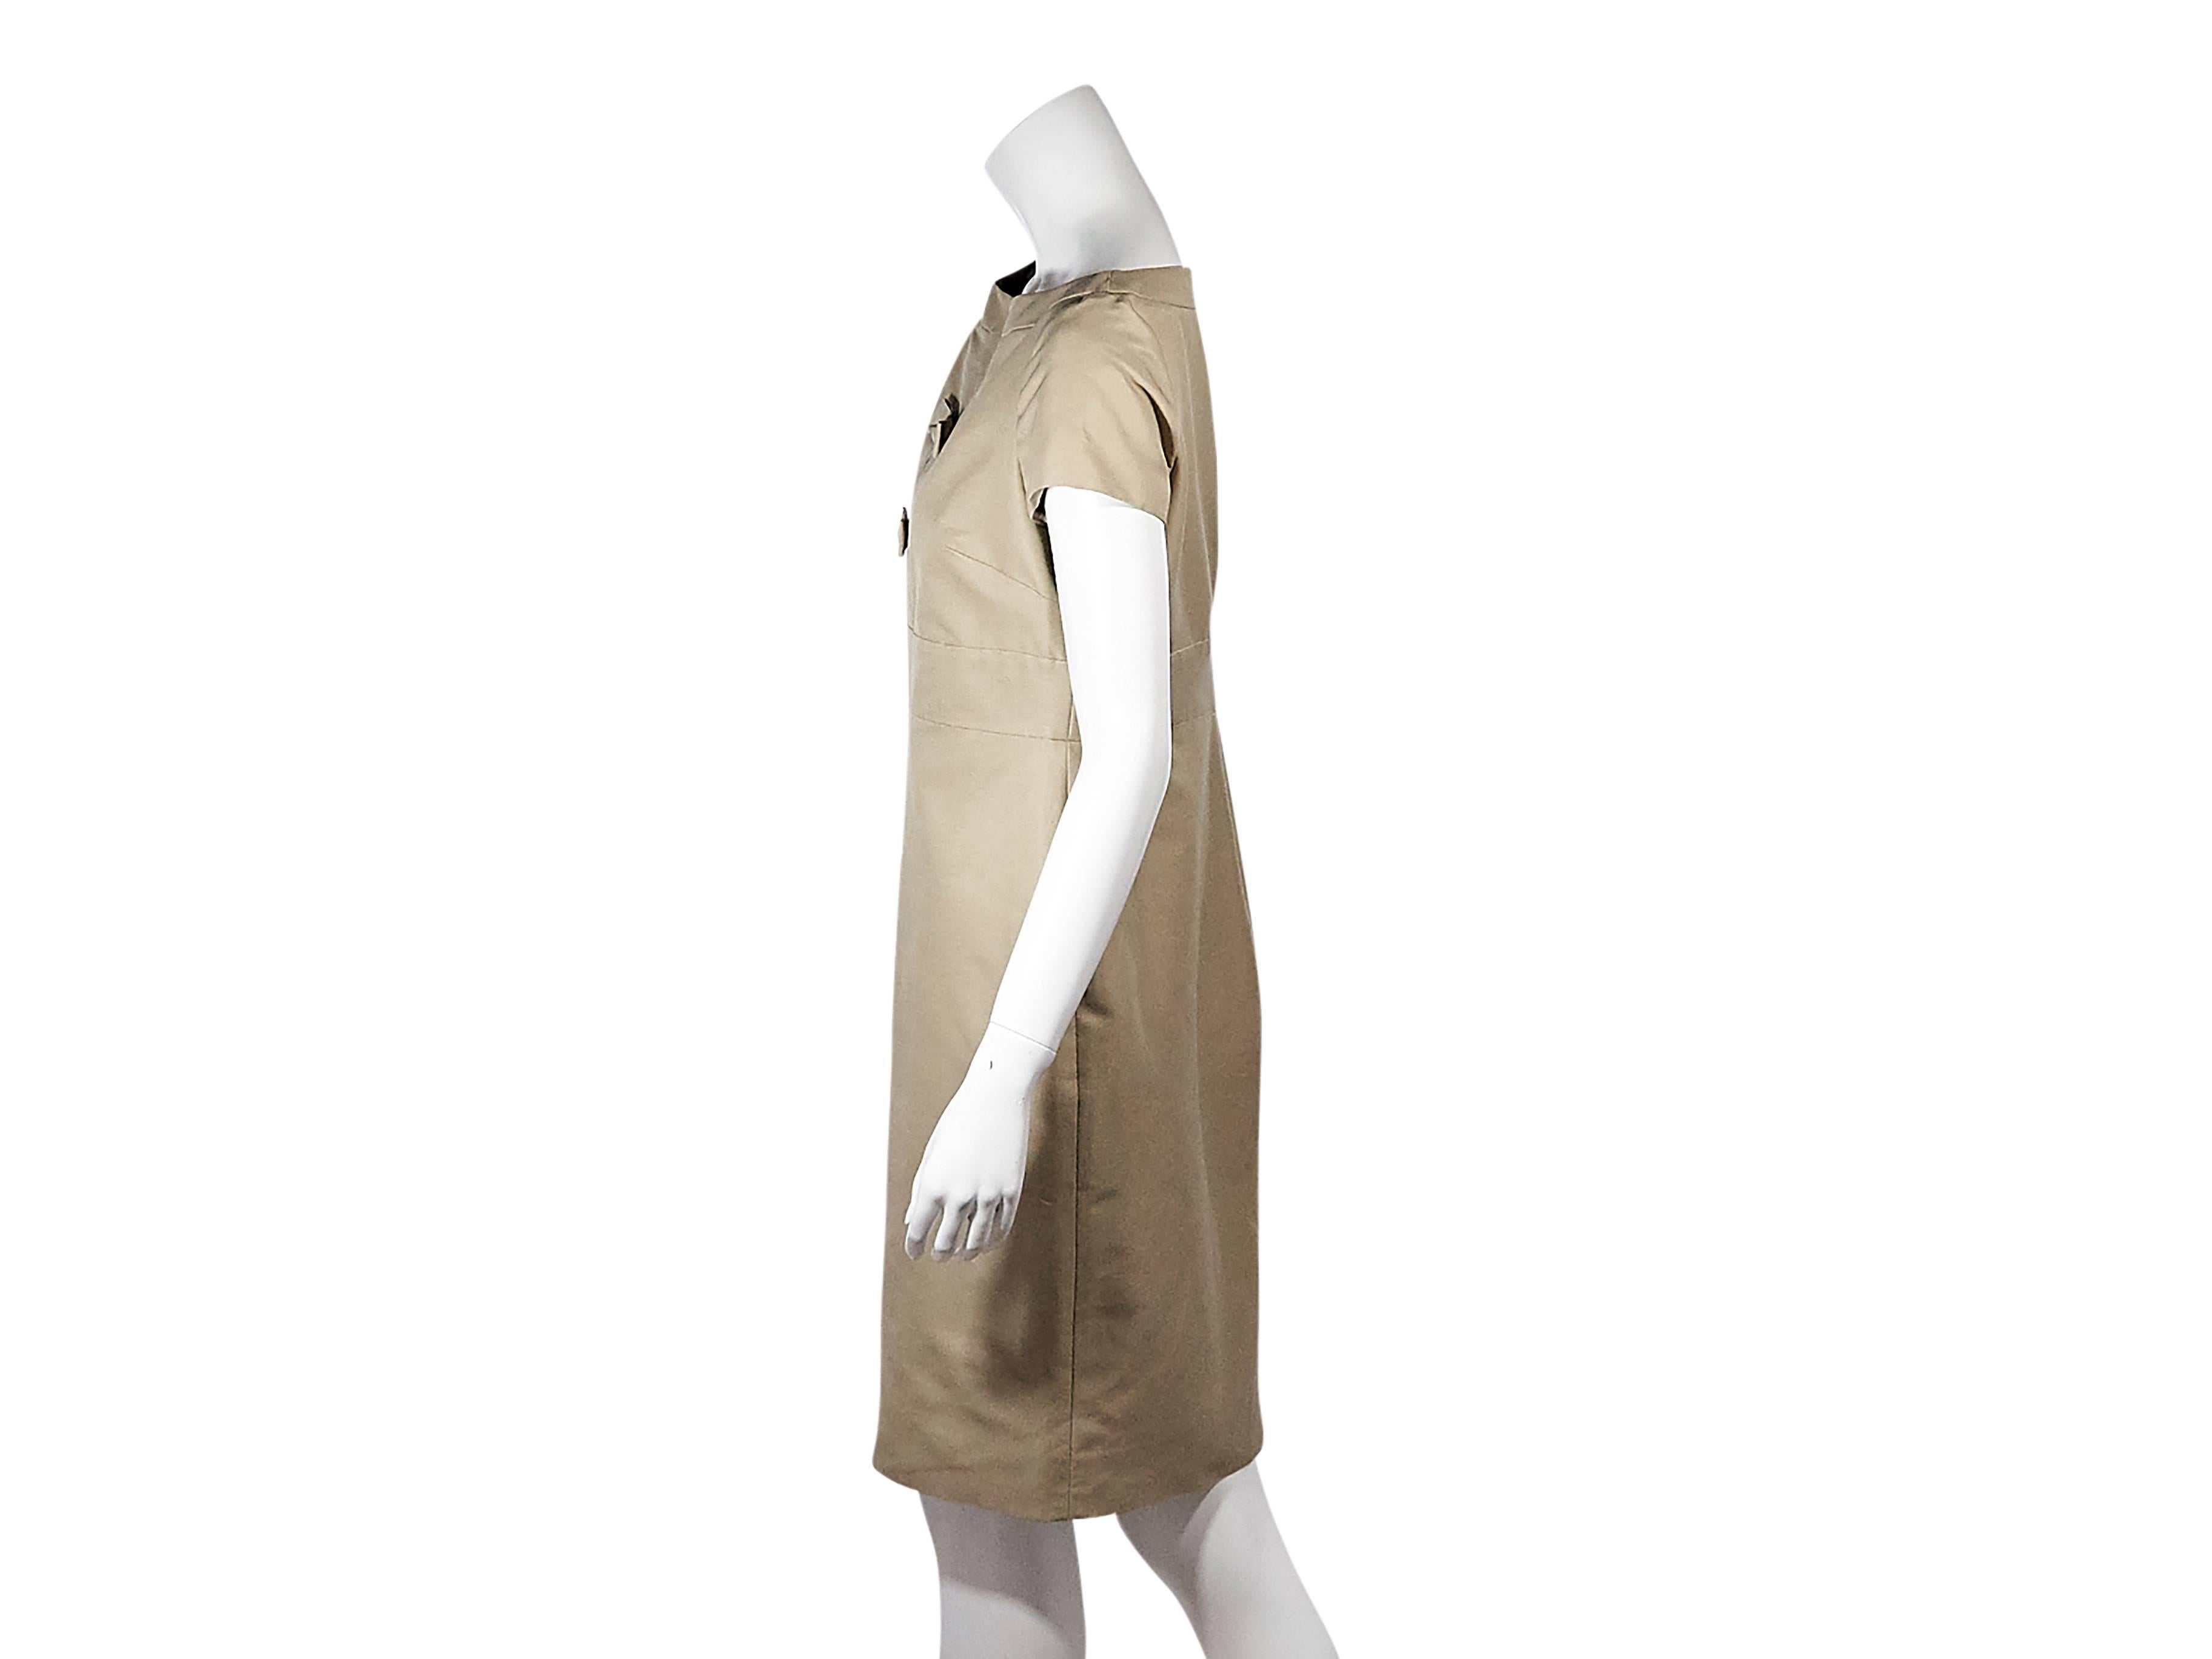 Product details: Tan bow shift dress by Valentino. Boatneck. Short sleeves. Banded Empire waist. Concealed back zip closure. 
Condition: Pre-owned. Very good.

Est. Retail $ 898.00
